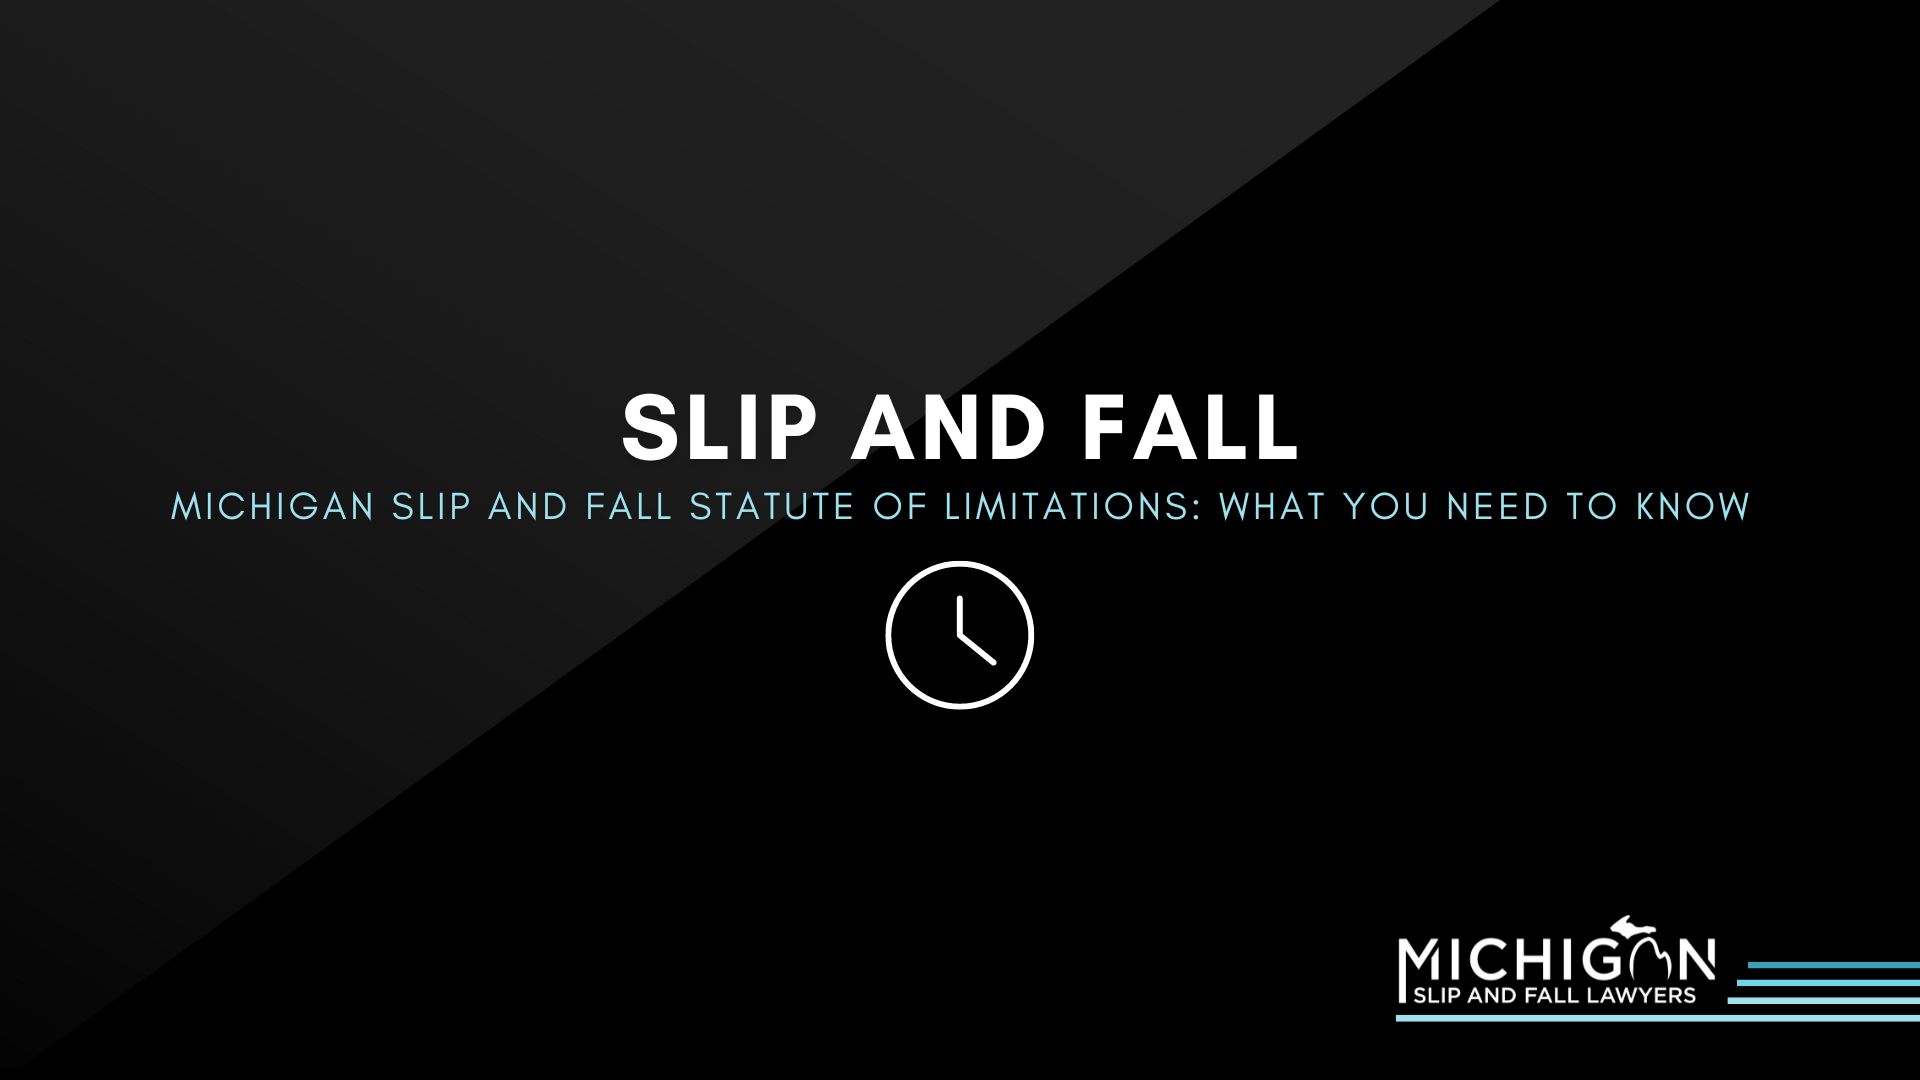 Michigan Slip And Fall Statute Of Limitations: Here’s What To Know